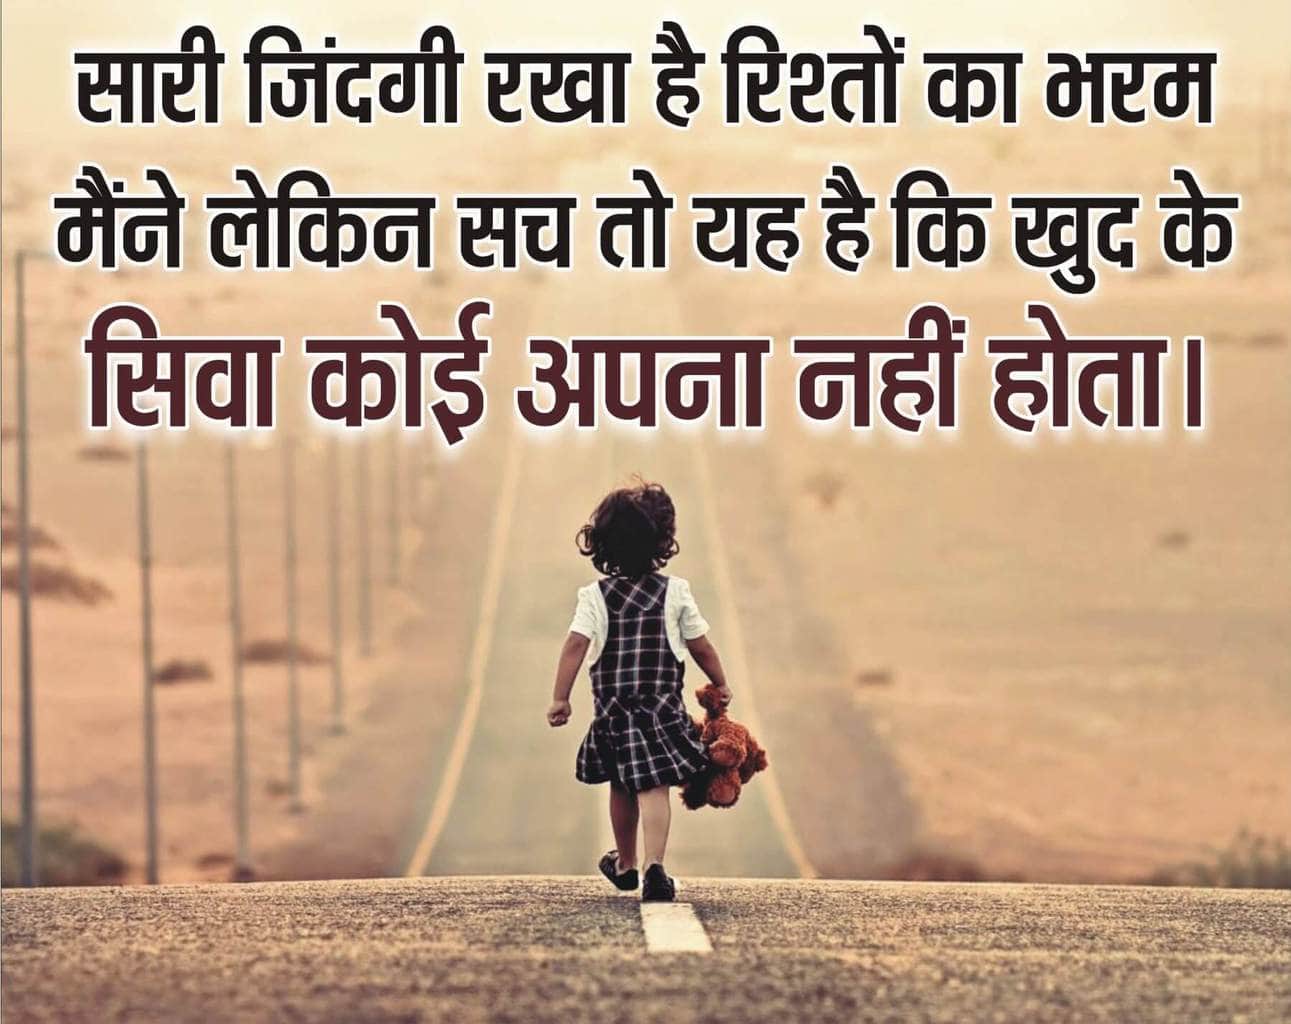 Meaningful Deep Hindi Quotes | Quotes and Wallpaper Y